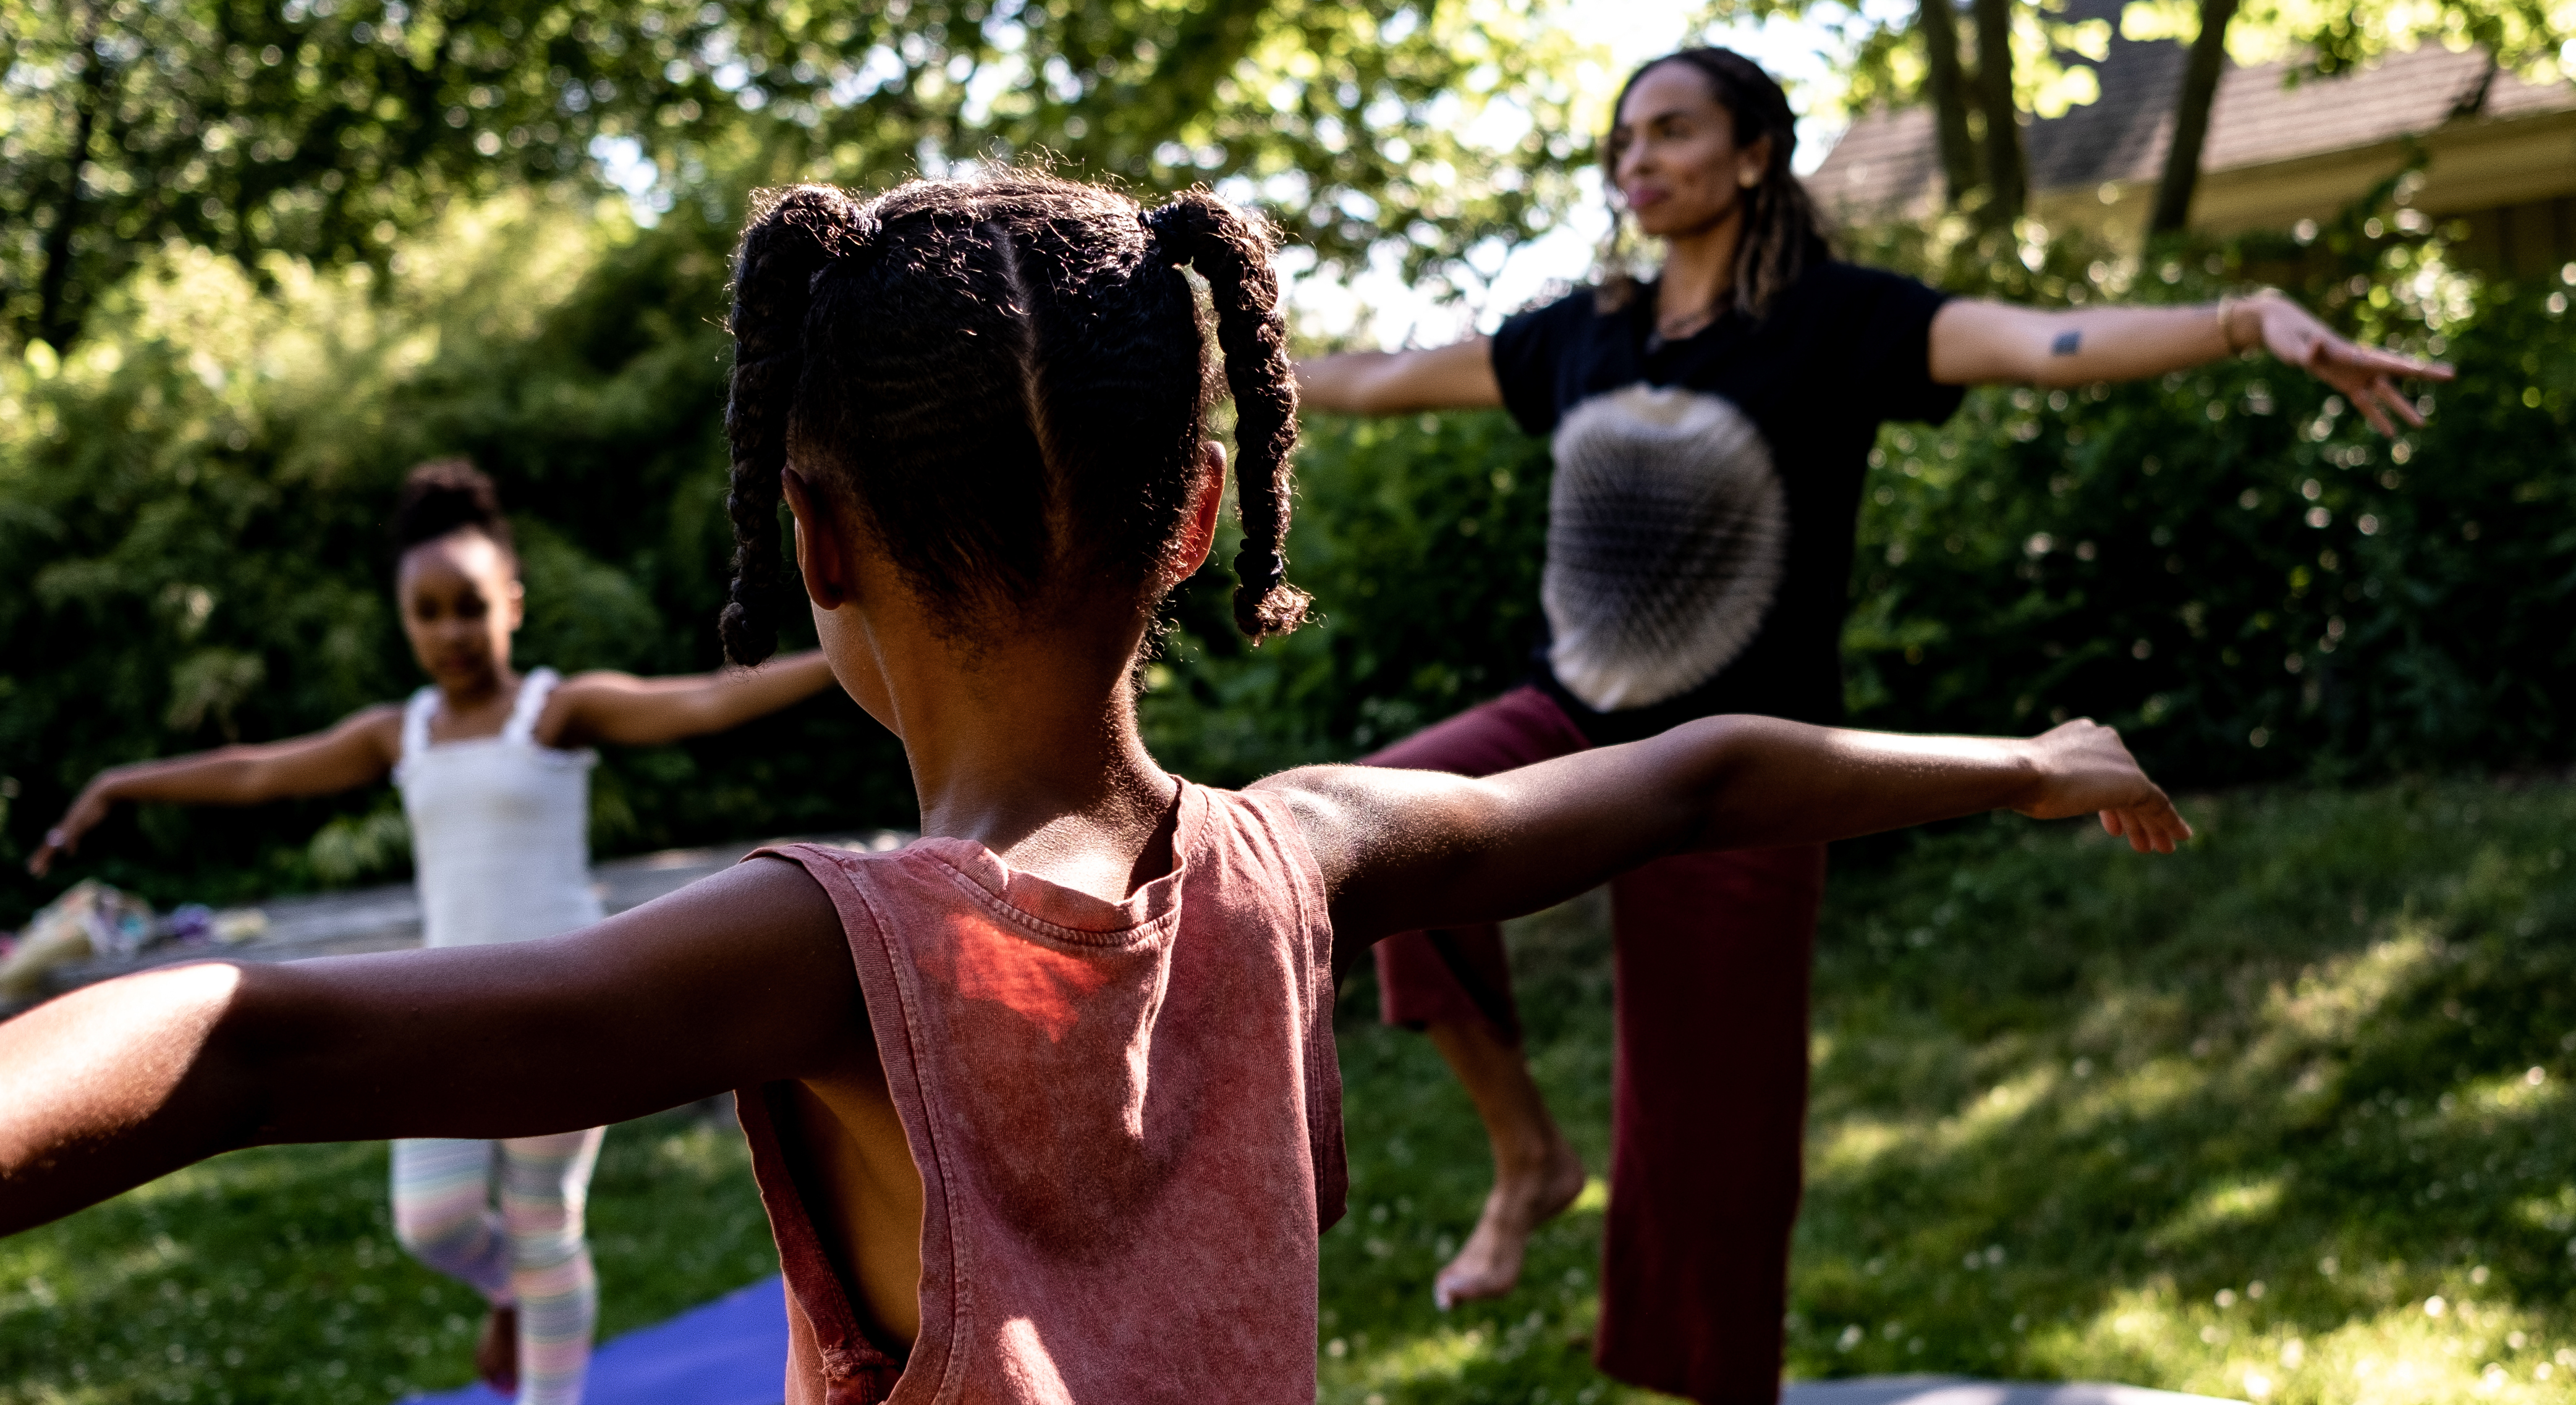 Two children and an instructor standing outside in grass and holding out their arms in yoga poses. There are trees and bushes in the background.